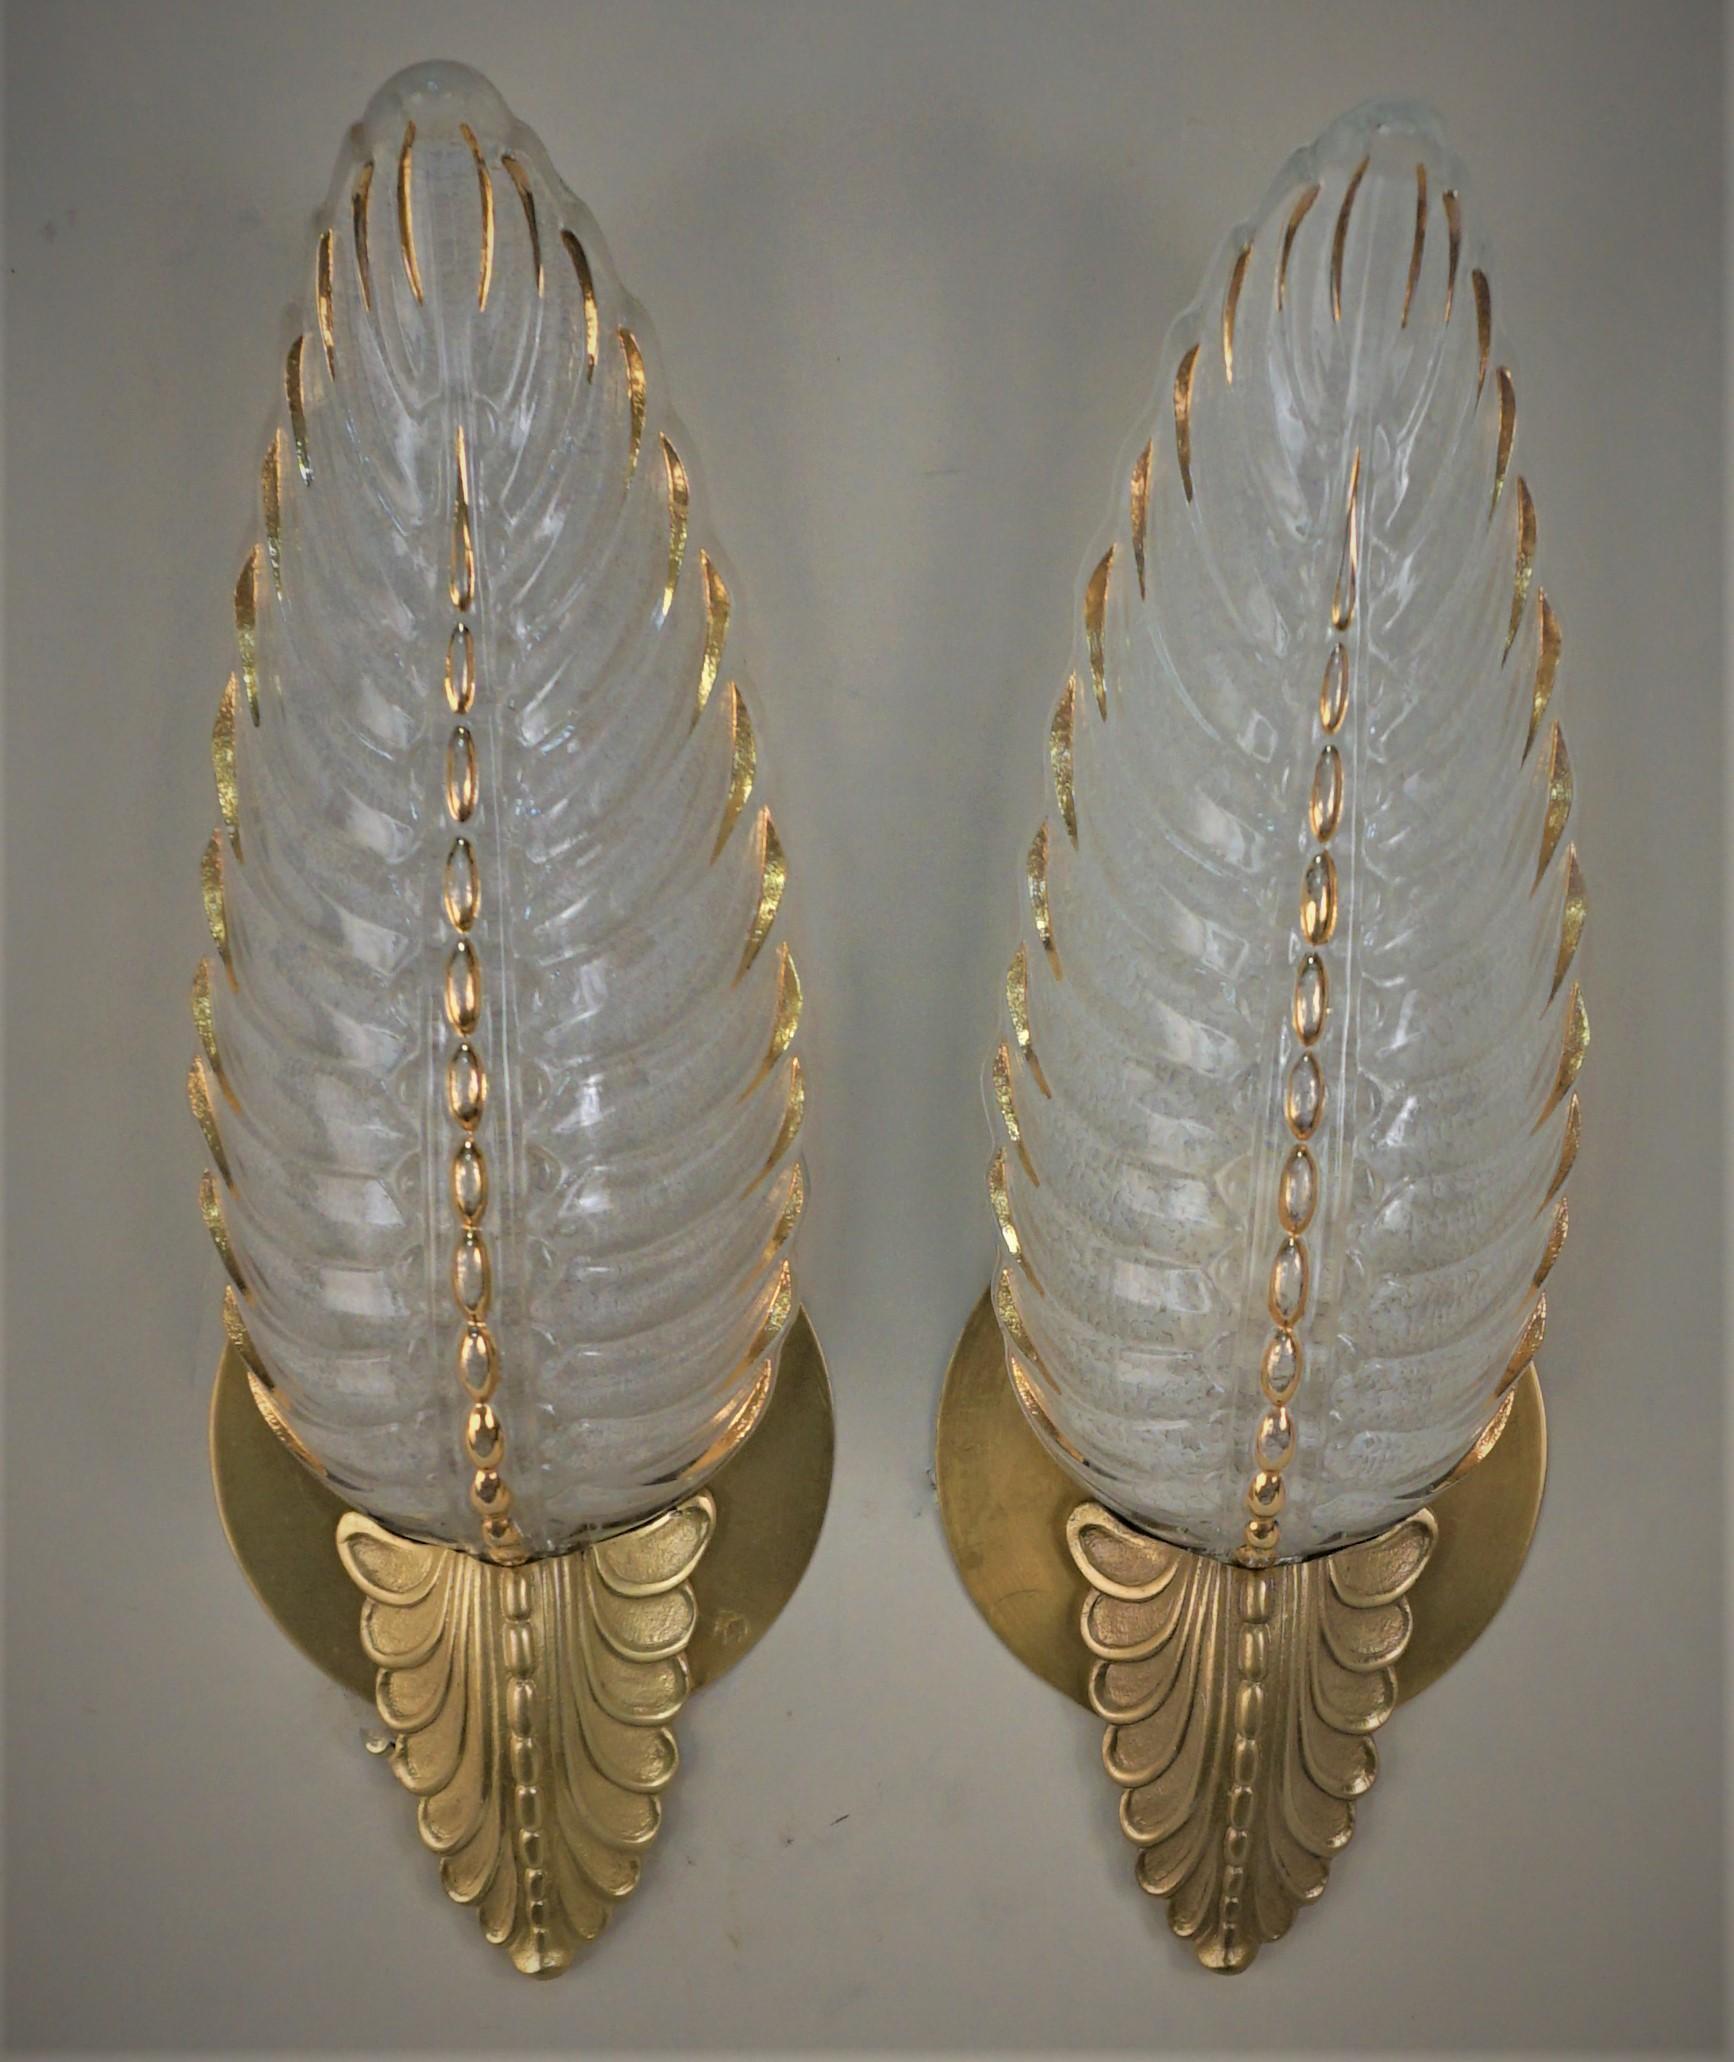  Pair of Art Deco, 1930s, Wall Sconces by Ezan, France For Sale 1